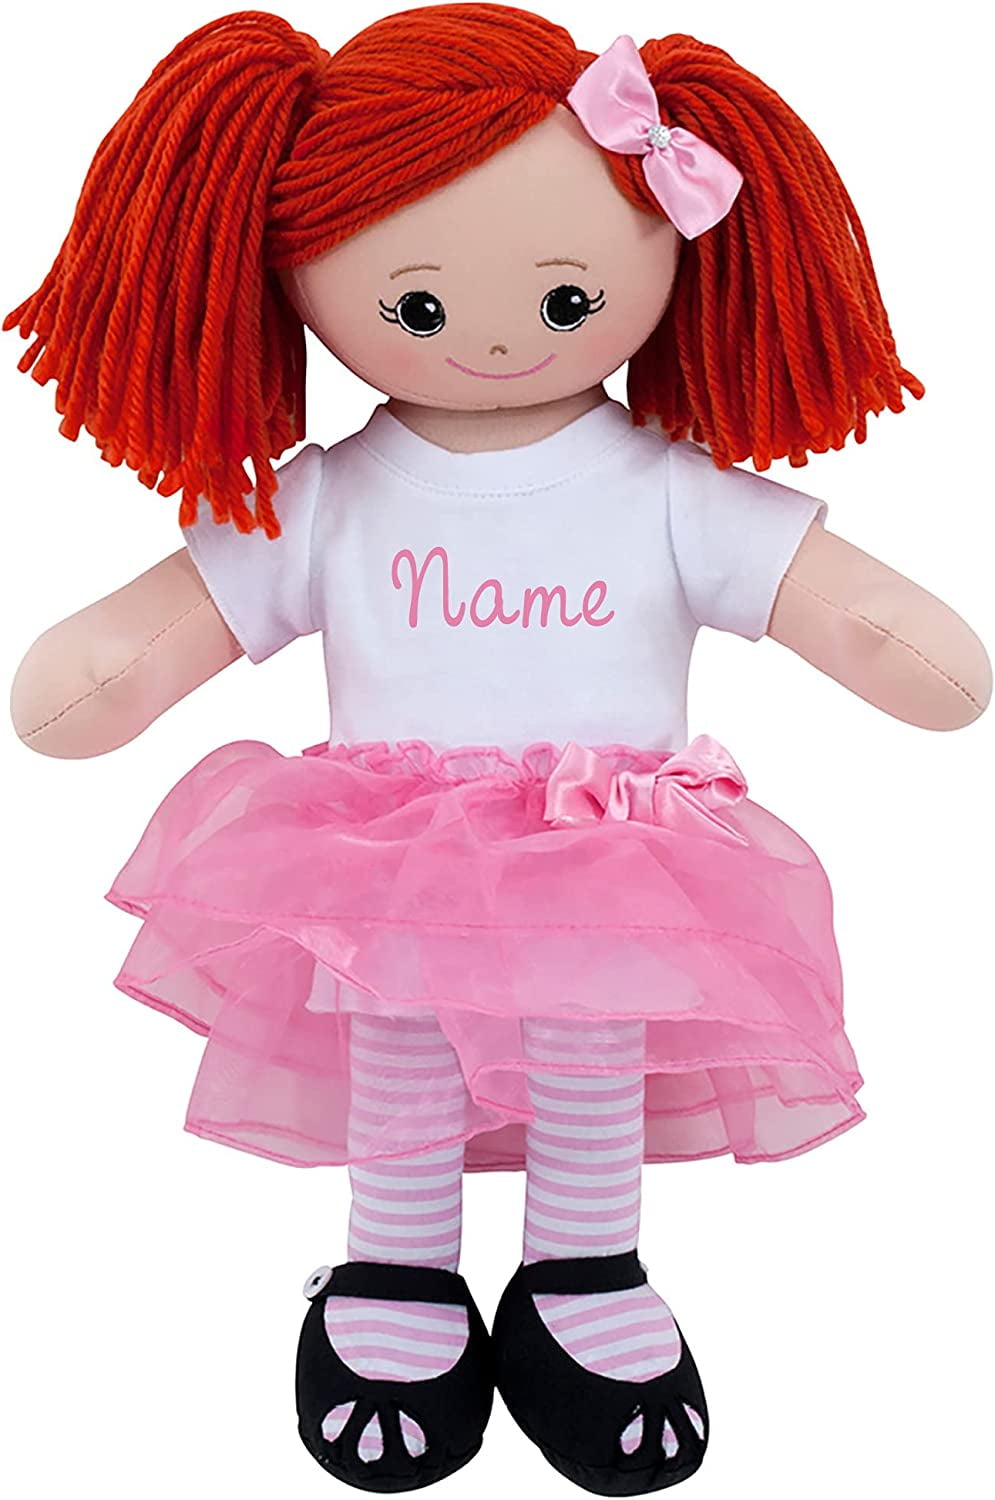 Tutu Hair With Ballerina Clip and Personalized Doll